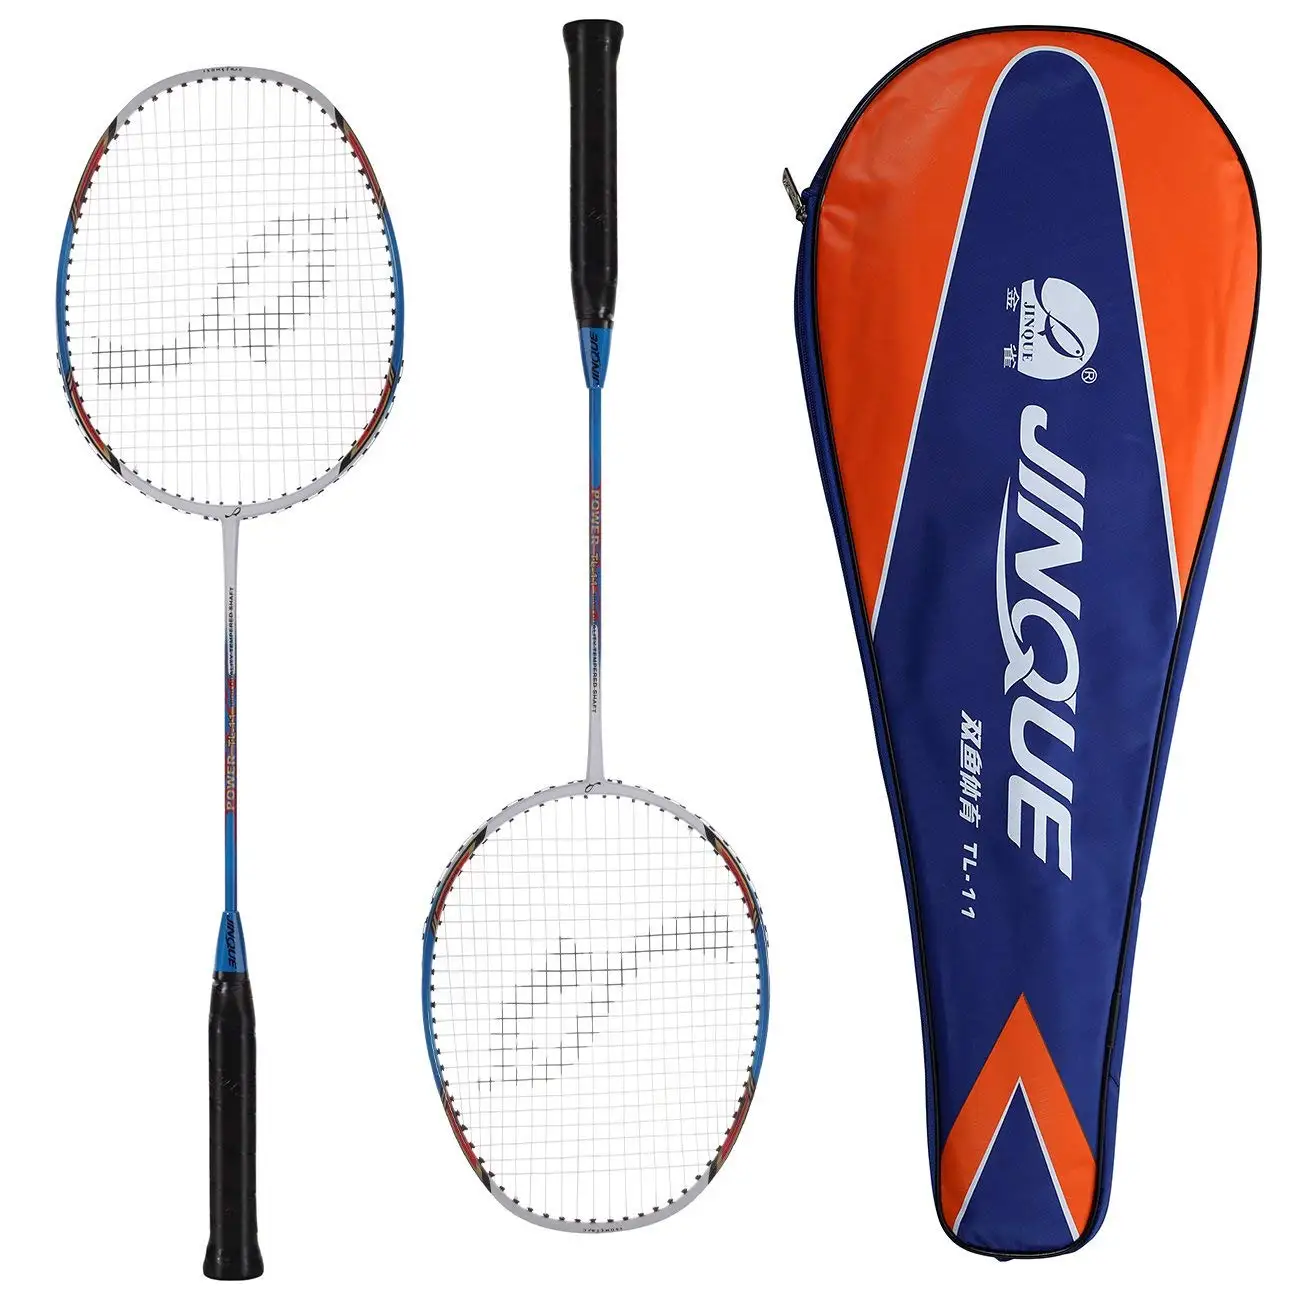 Junior Training Jinque Badminton Rackets 2-Player Beginners Practice Racquets Lightweight Badminton Racquets with Carrying Bag for Kids and Adults 